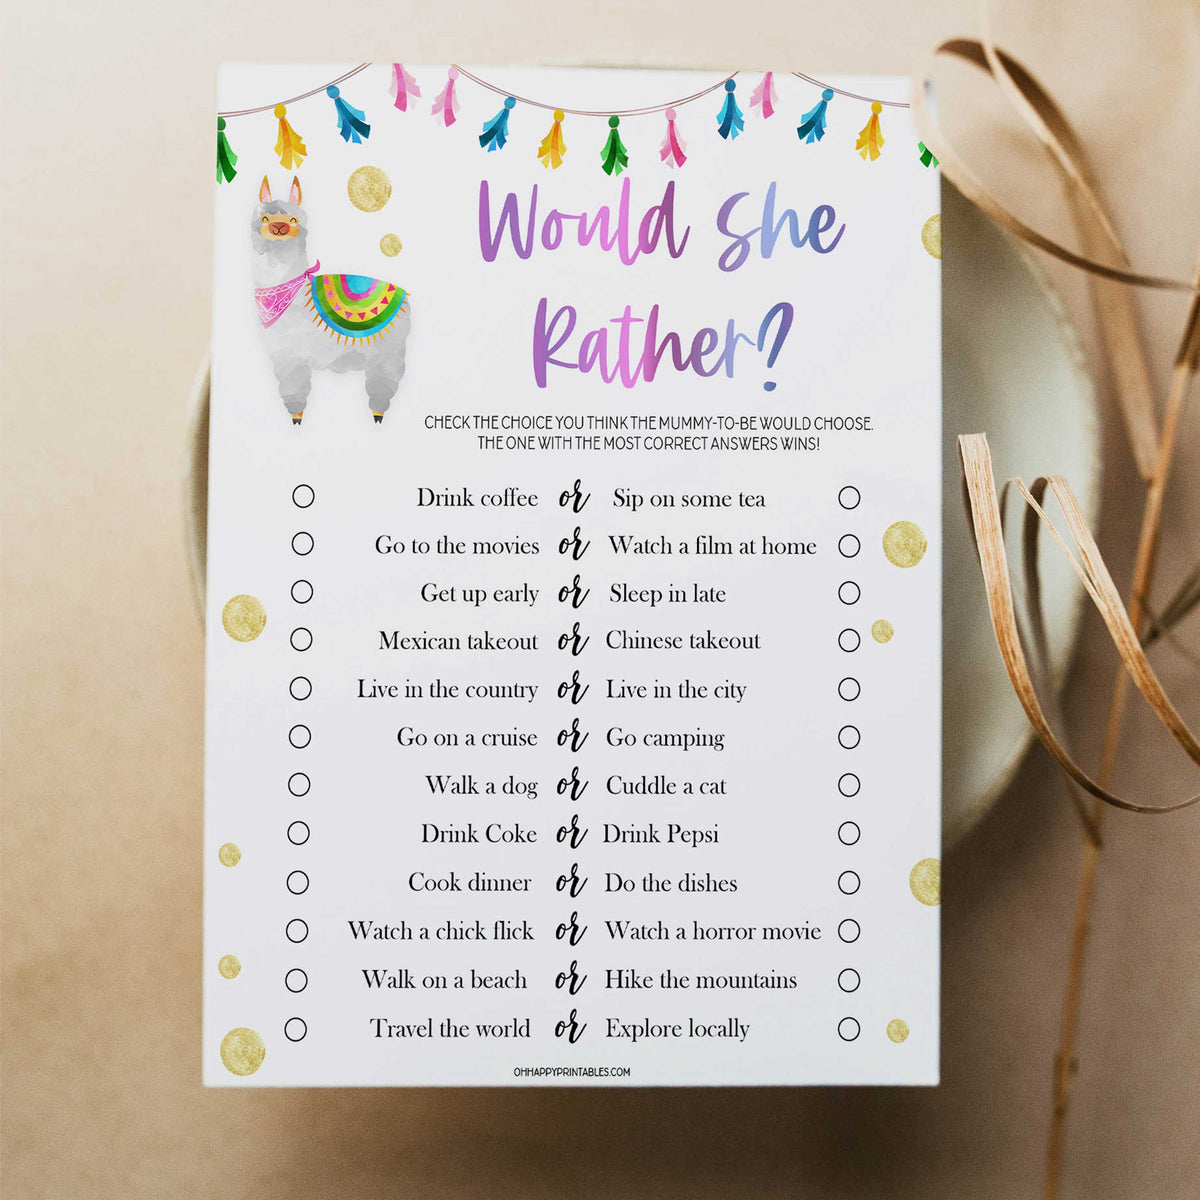 baby shower would she rather, would she rather game, Printable baby shower games, llama fiesta fun baby games, baby shower games, fun baby shower ideas, top baby shower ideas, Llama fiesta shower baby shower, fiesta baby shower ideas